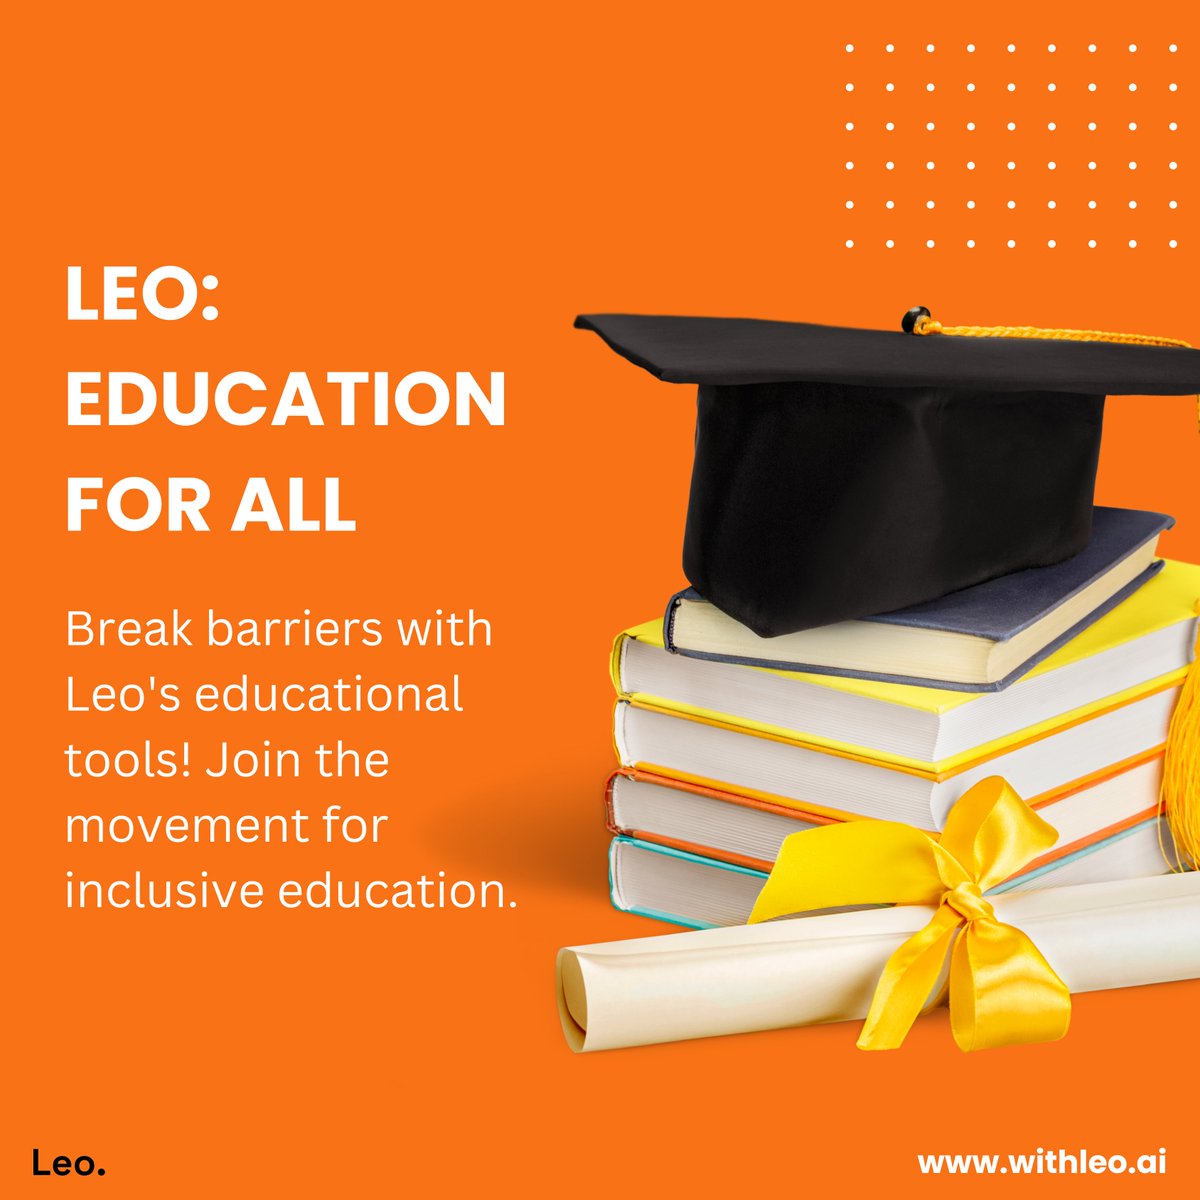 Leo champions global education equity by providing tools for overcoming learning barriers. Join us in making education inclusive at withleo.ai. 🌍

#AI #edtech #education #teaching #AIinEducation #TeacherTools #TeachingAssistants #EducationalAI